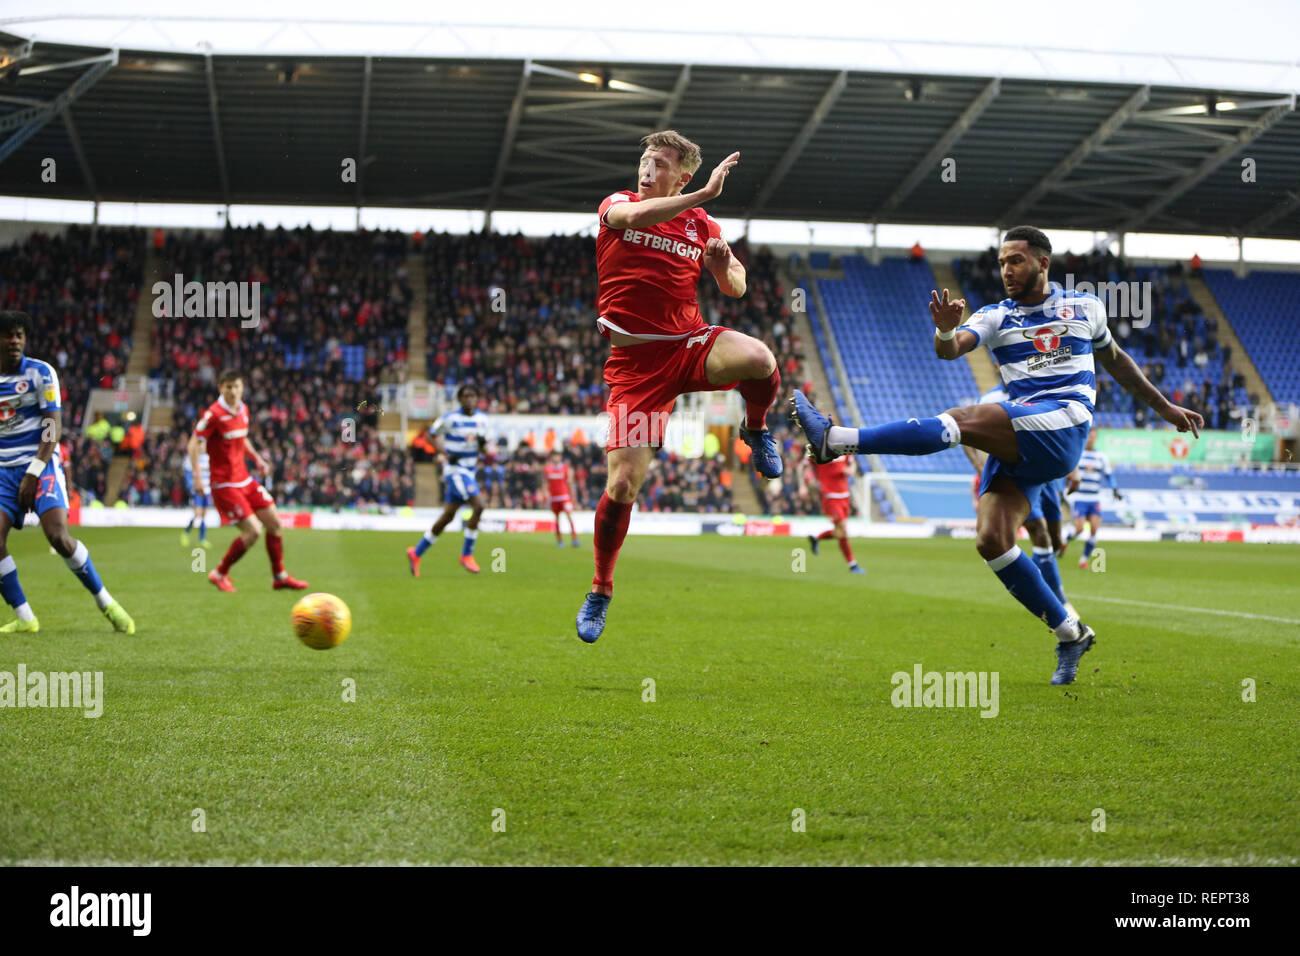 12th January 2019, Madejski Stadium, London, England; Sky Bet Championship, Reading vs Nottingham Forest ; Liam Moore (06) of Reading clears the ball.  Credit: Matt O'Connor/News Images,  English Football League images are subject to DataCo Licence Stock Photo